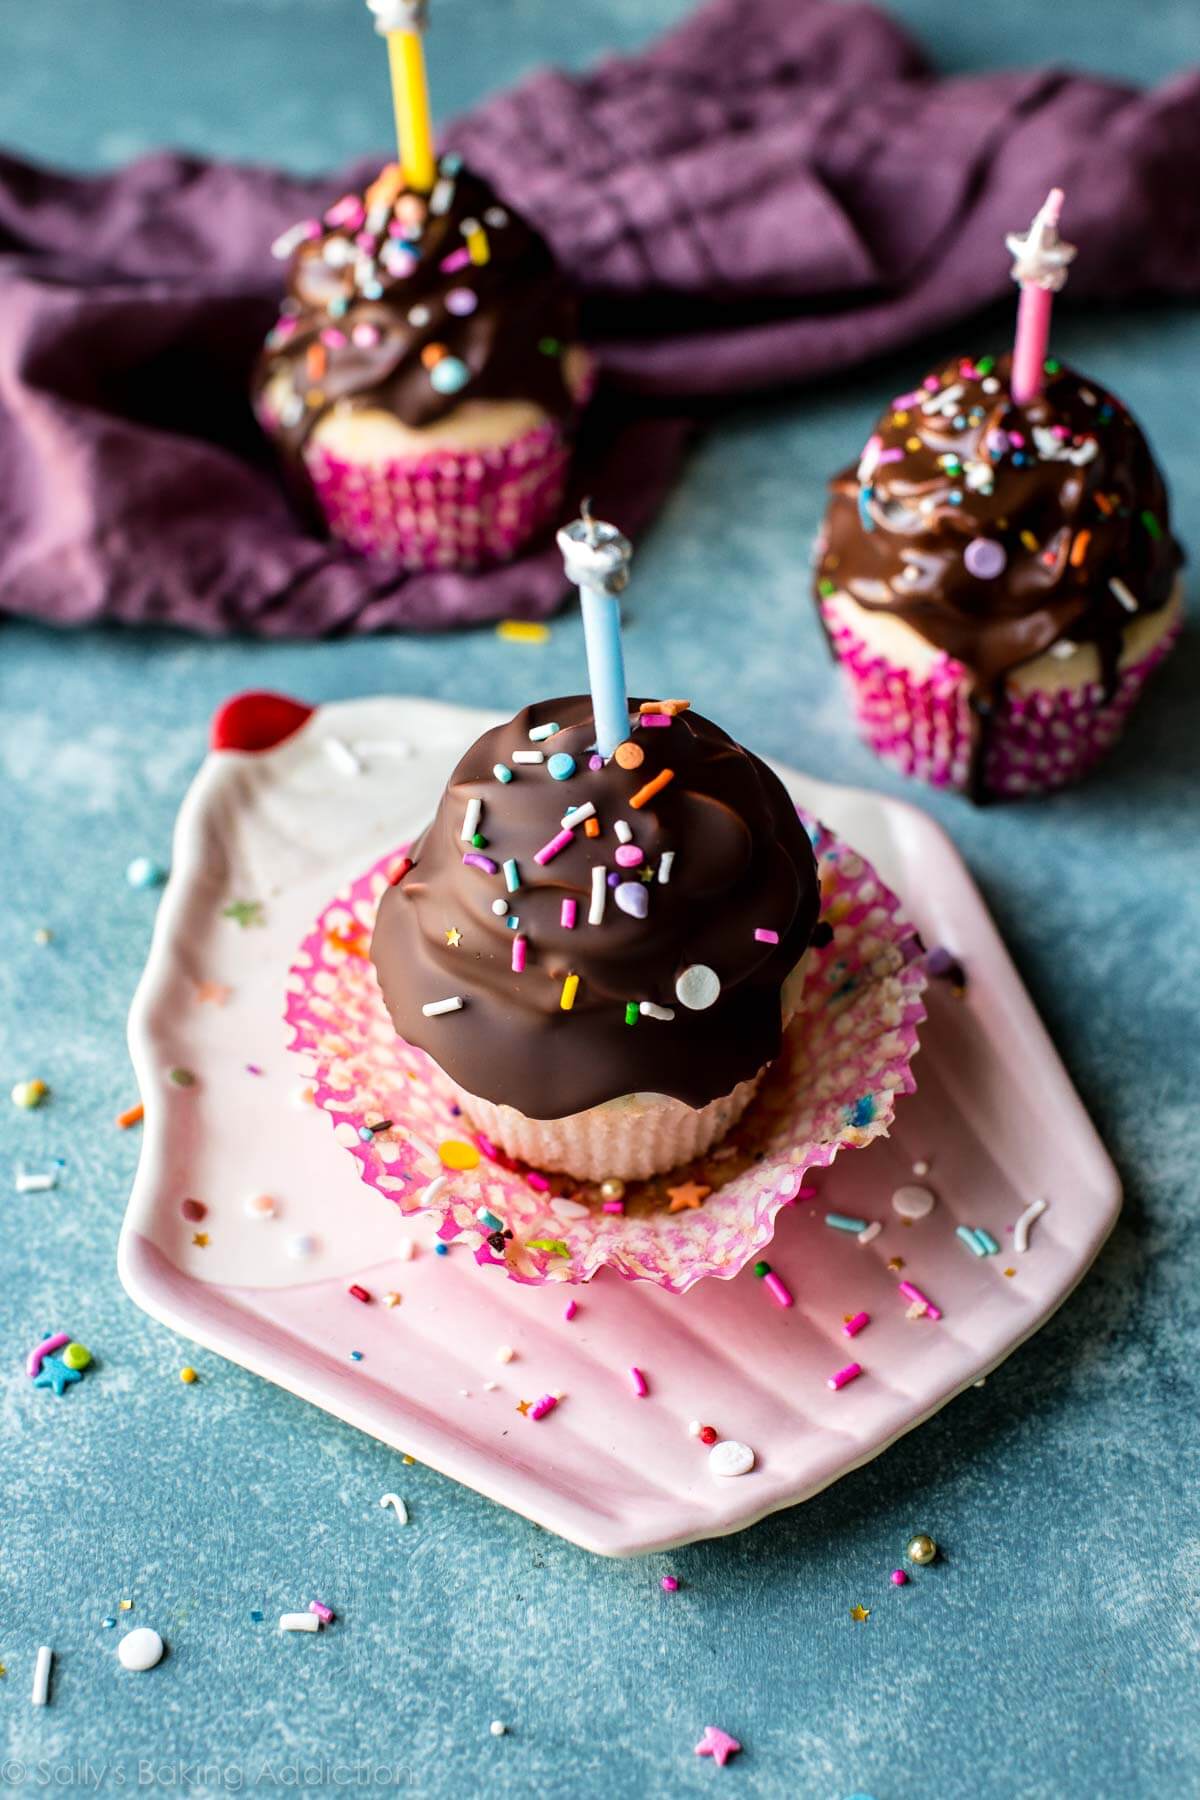 birthday cupcakes with chocolate coating, sprinkles, and candles